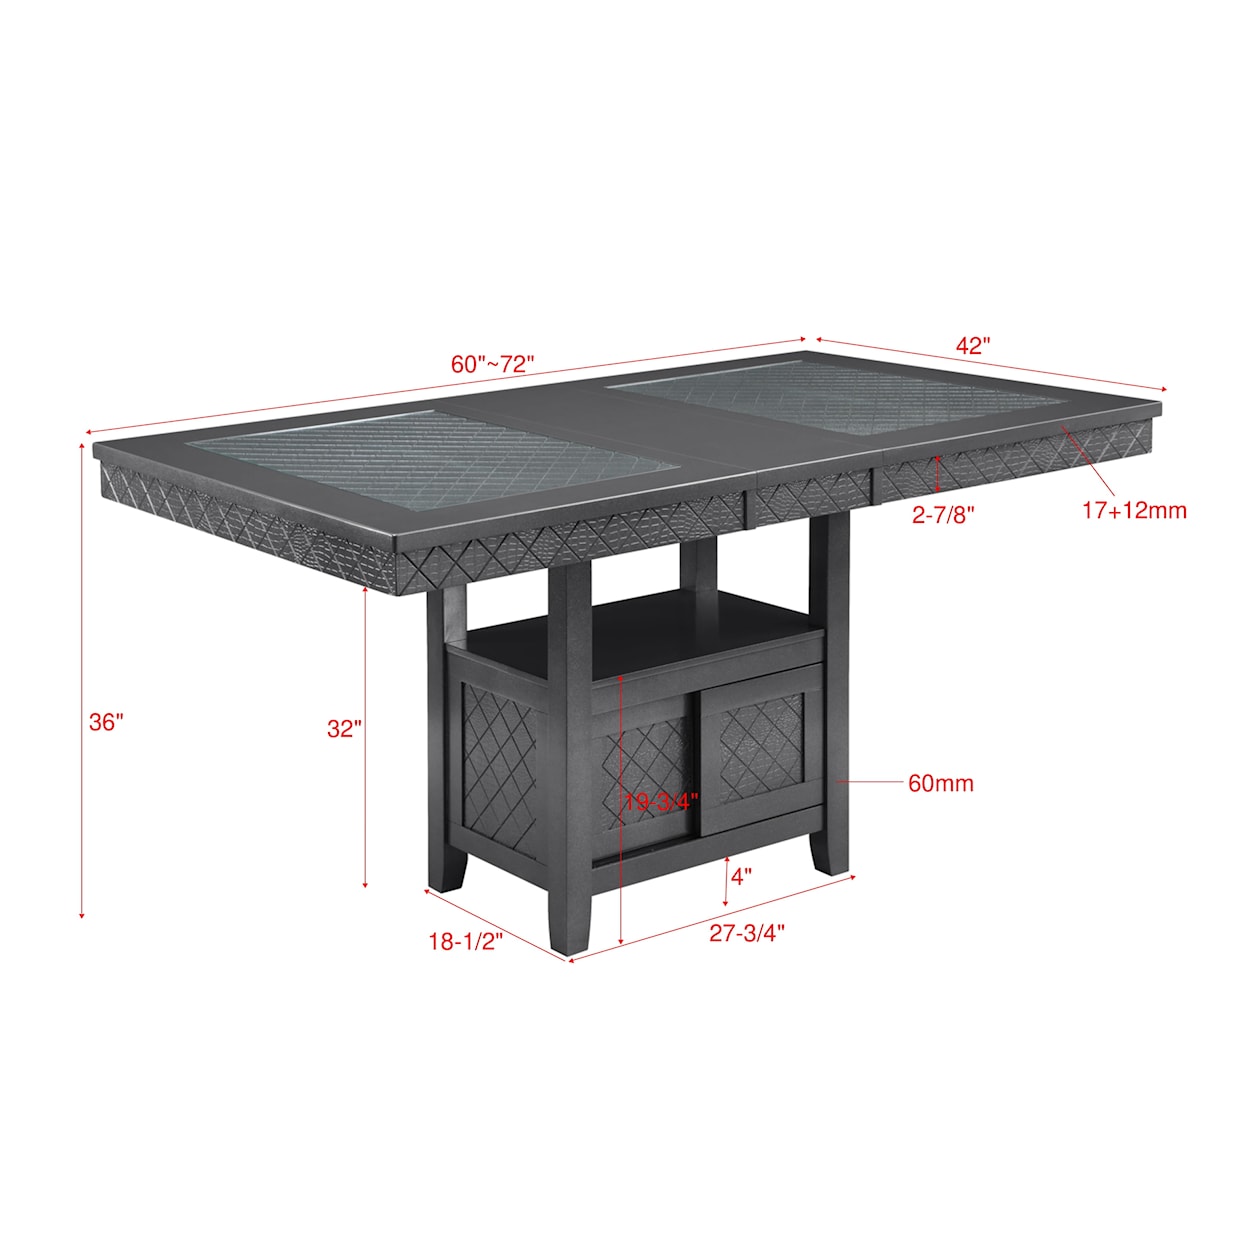 Crown Mark Bankston Counter Height Dining Table